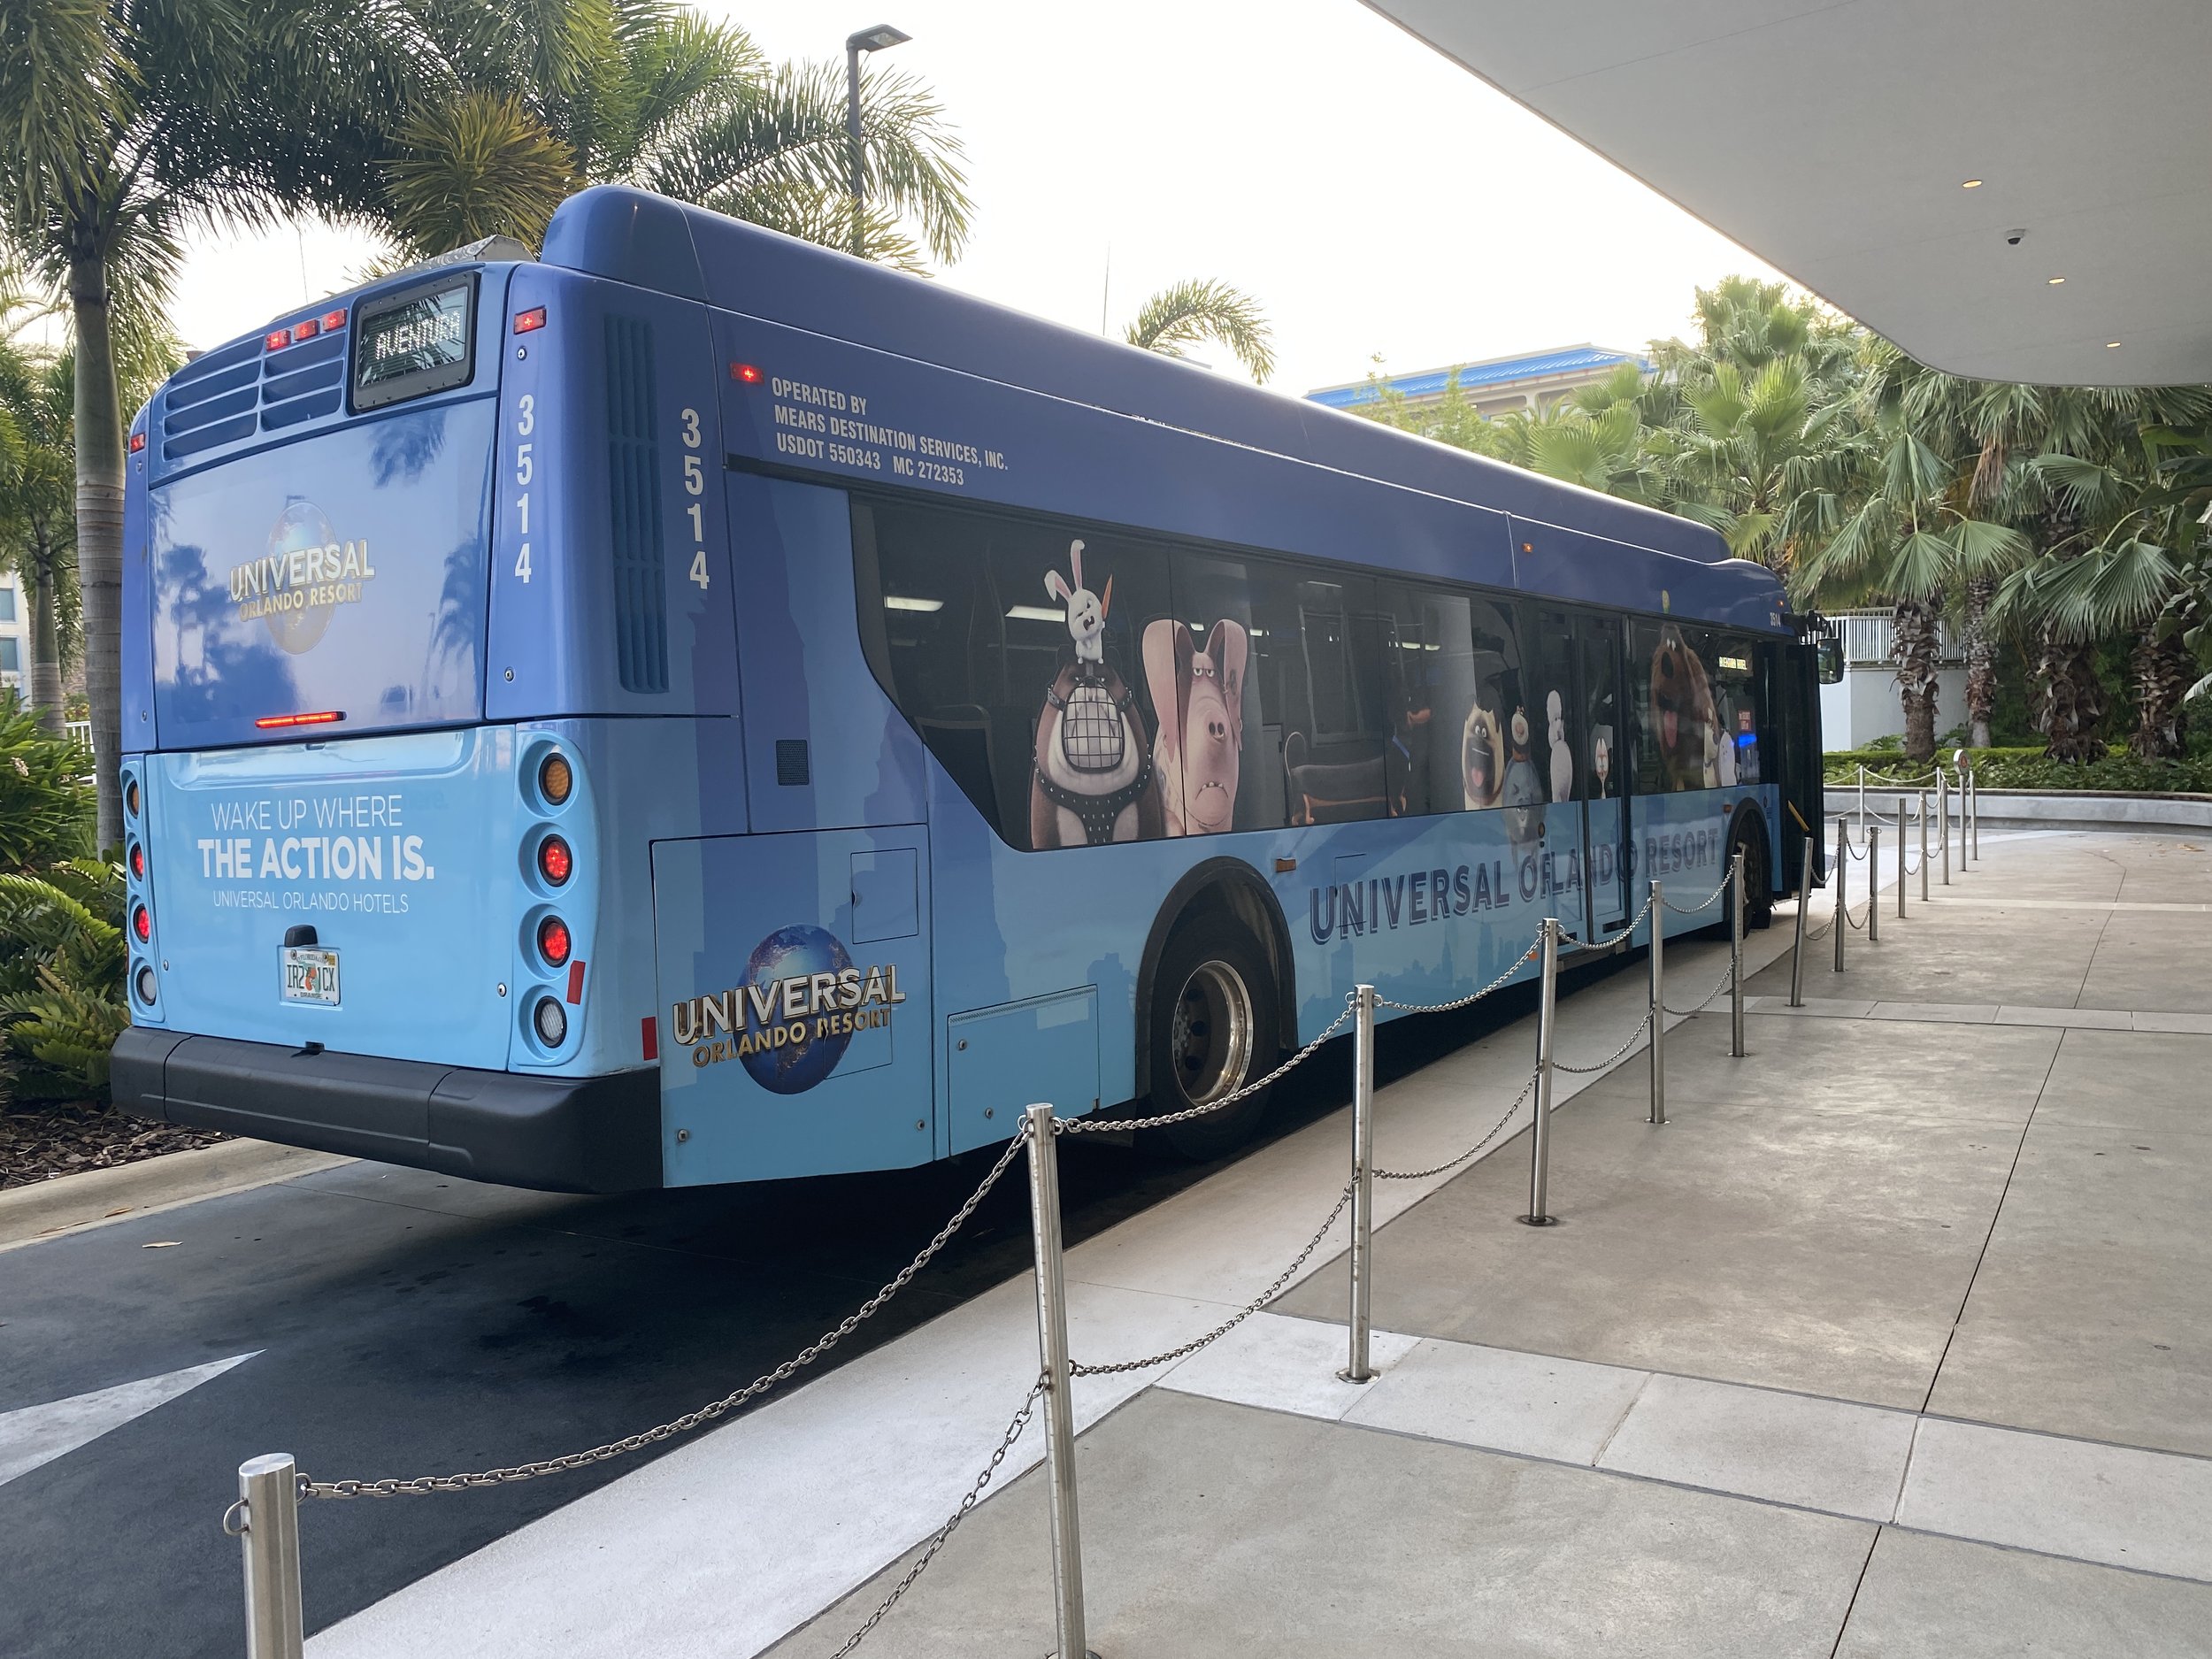  Complimentary bus transportation is provided to Universal’s theme parks. Buses arrive every 15-20 minutes. The bus ride takes  about 5-10 minutes.    On the return trip, buses stop at Universal’s Cabana Bay Beach Resort first.    Aventura is within 